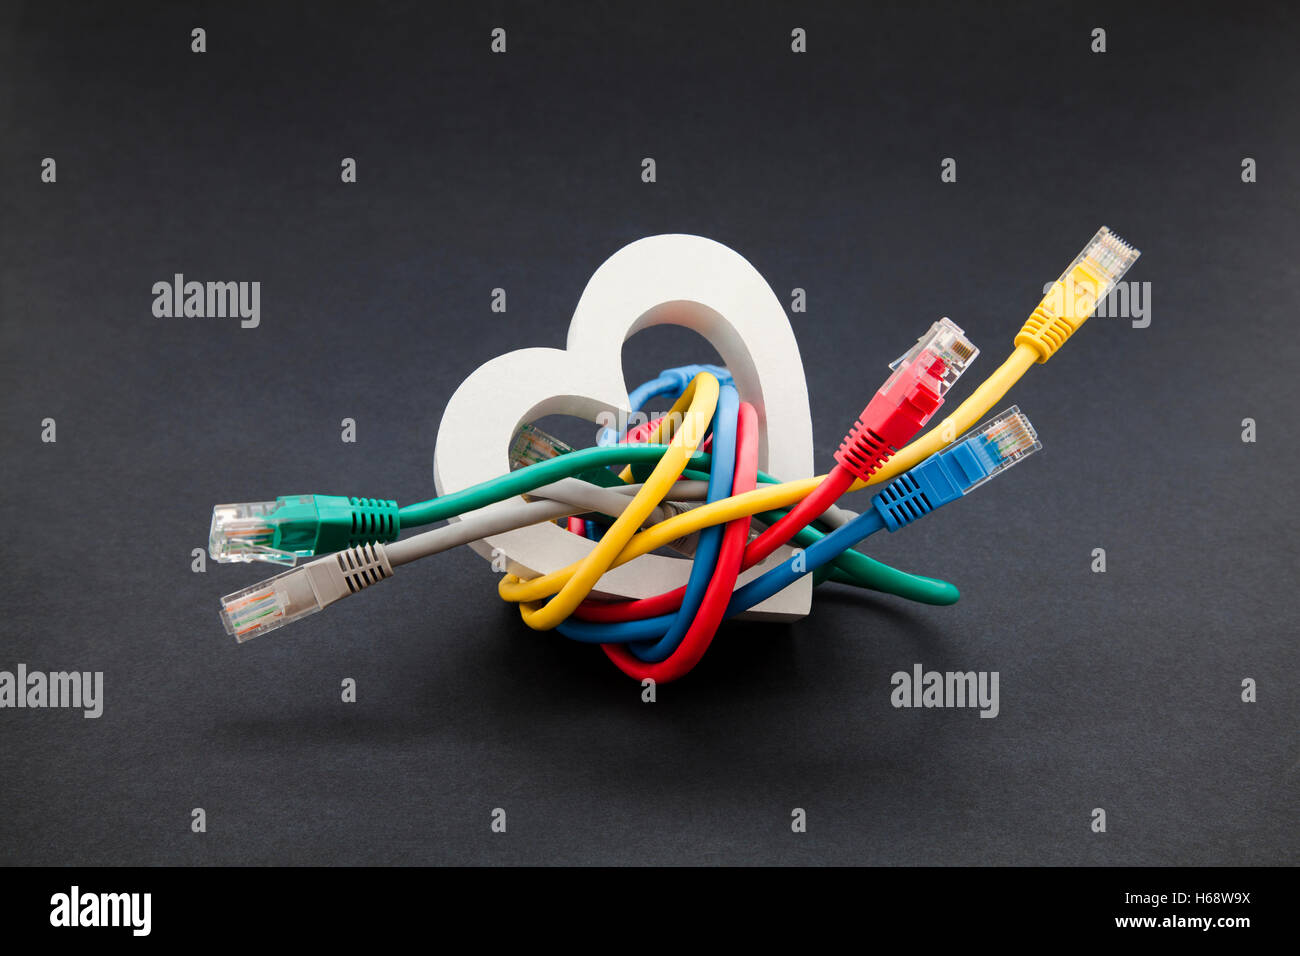 Online love and social networking concept. Network cables with heart shape Stock Photo